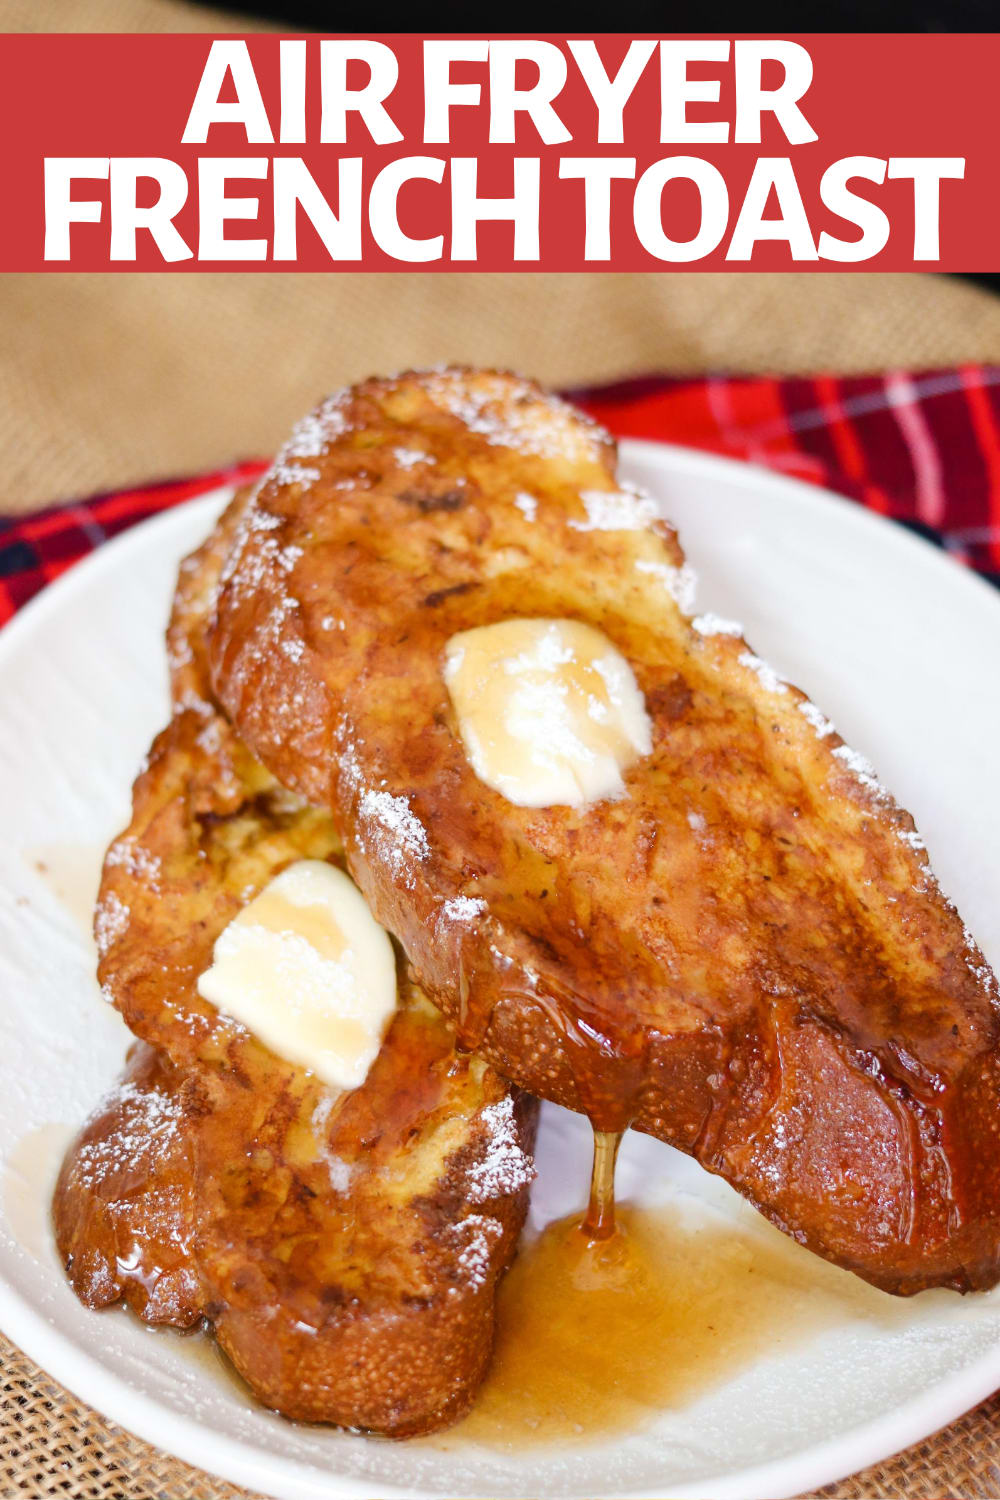 Air Fryer French Toast is quick, easy, and delicious! It takes barely any time t… | Air fryer recipes healthy, Air fryer recipes breakfast, Air fryer dinner recipes